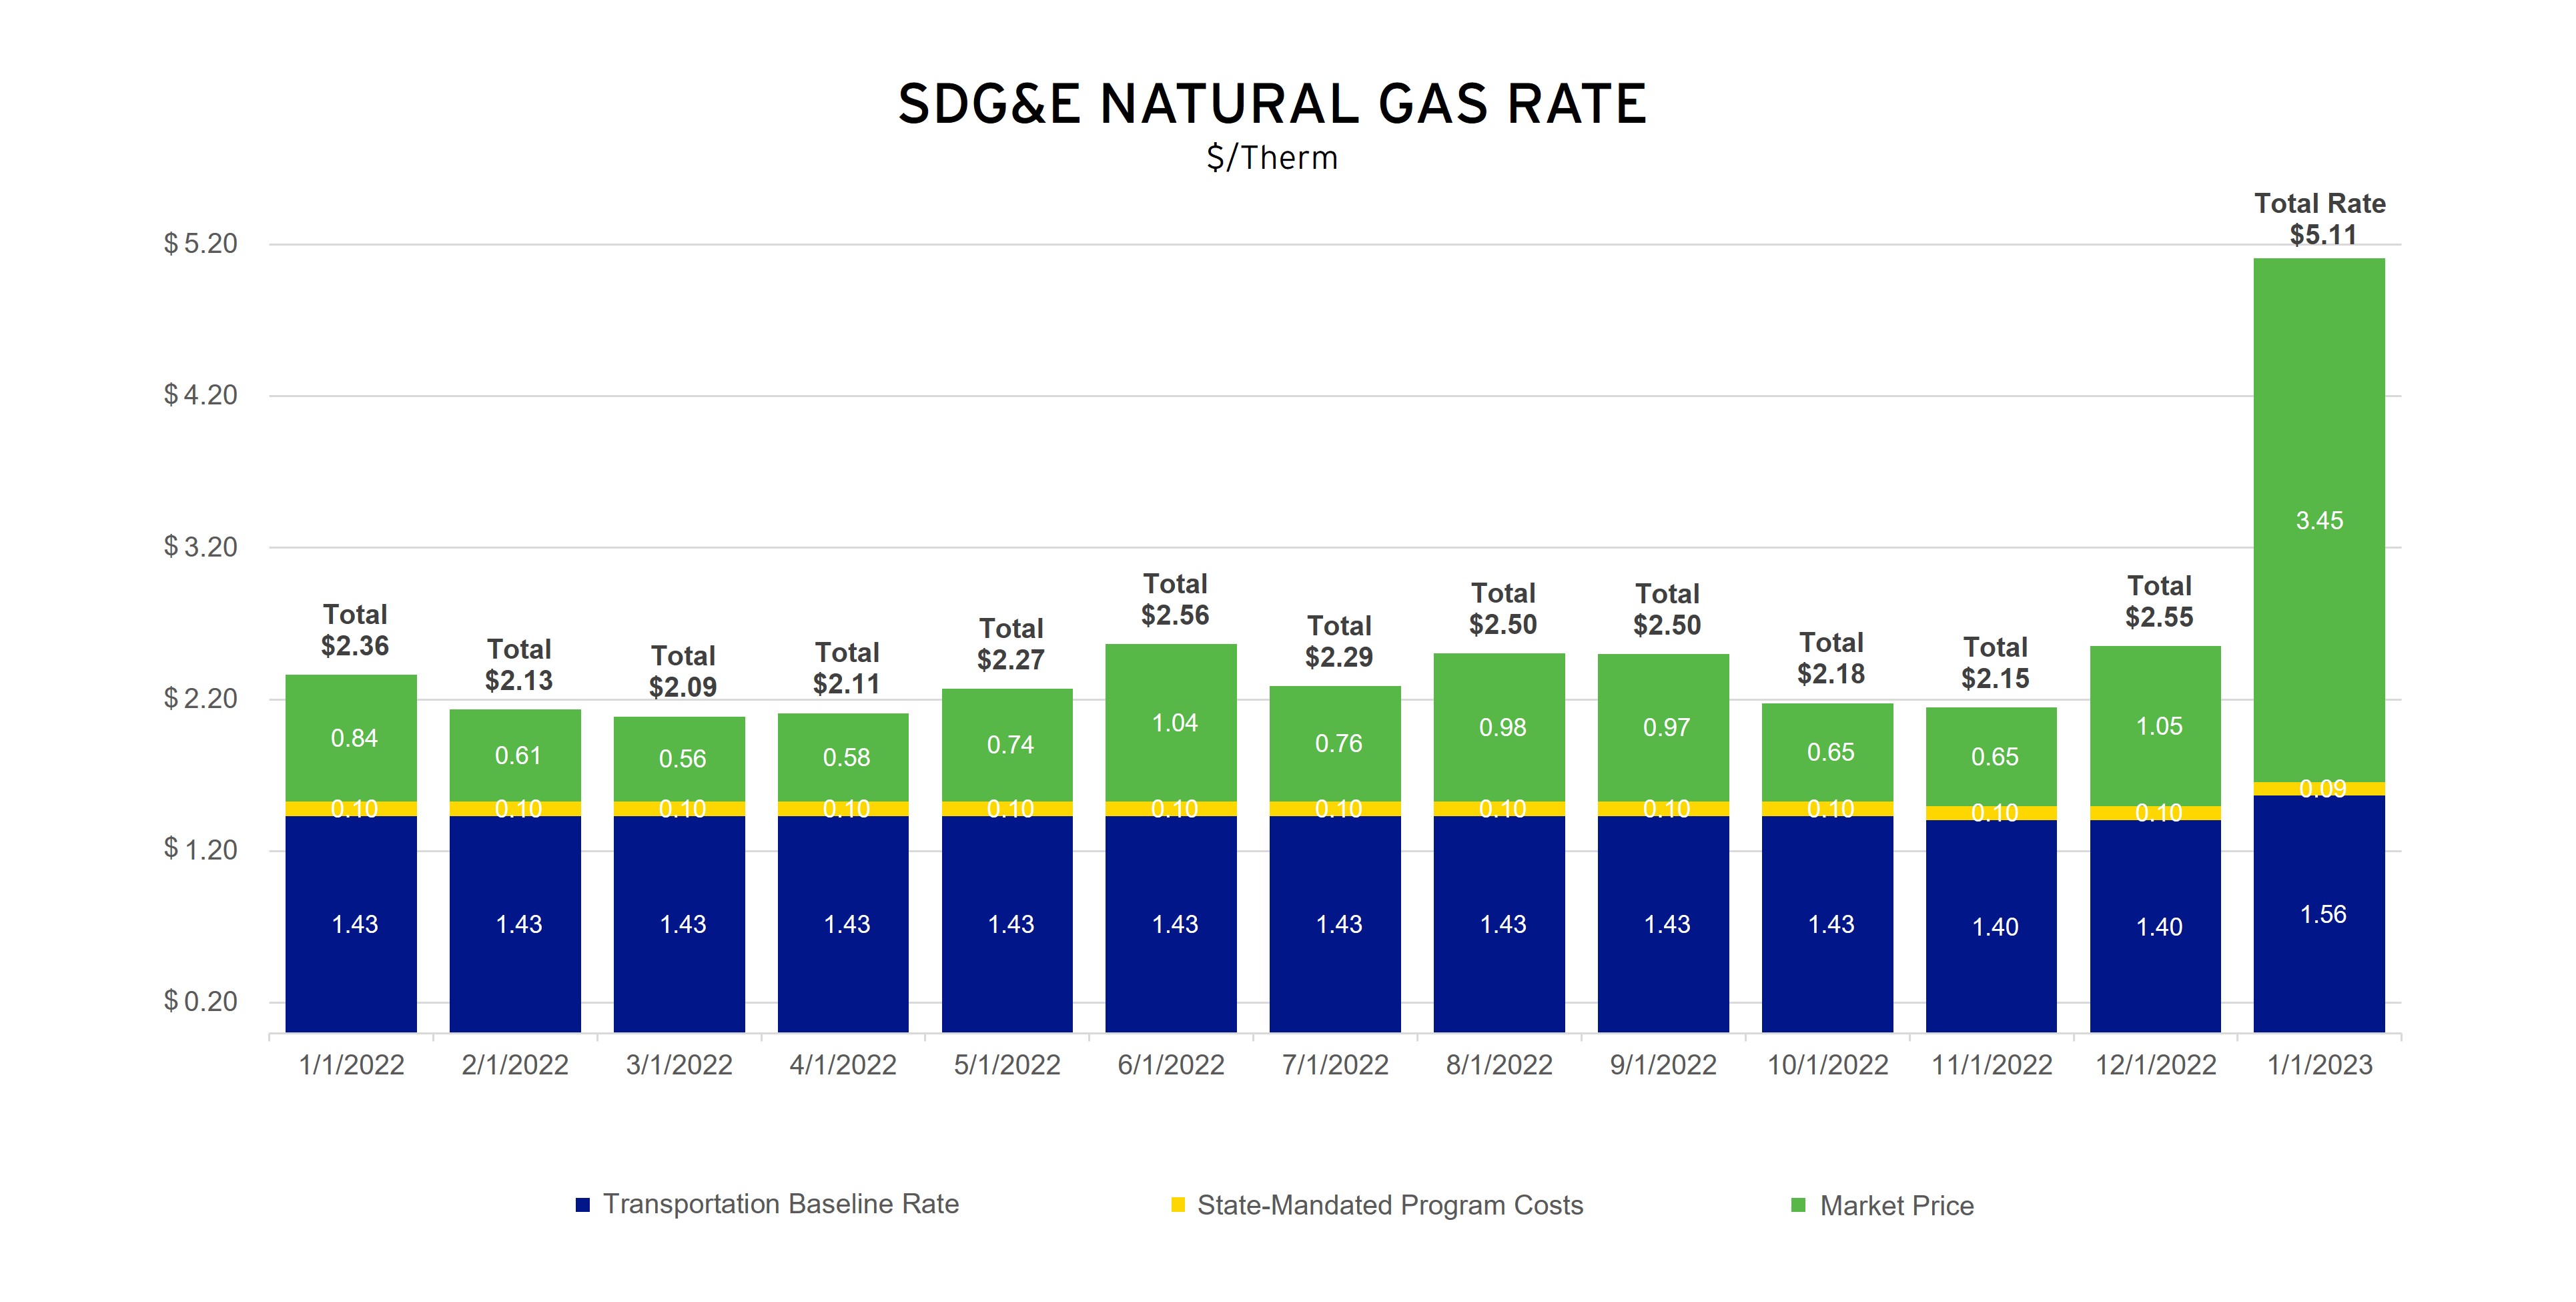 SDG&E Adopts New Rates Impacted By Historically High Natural Gas Prices